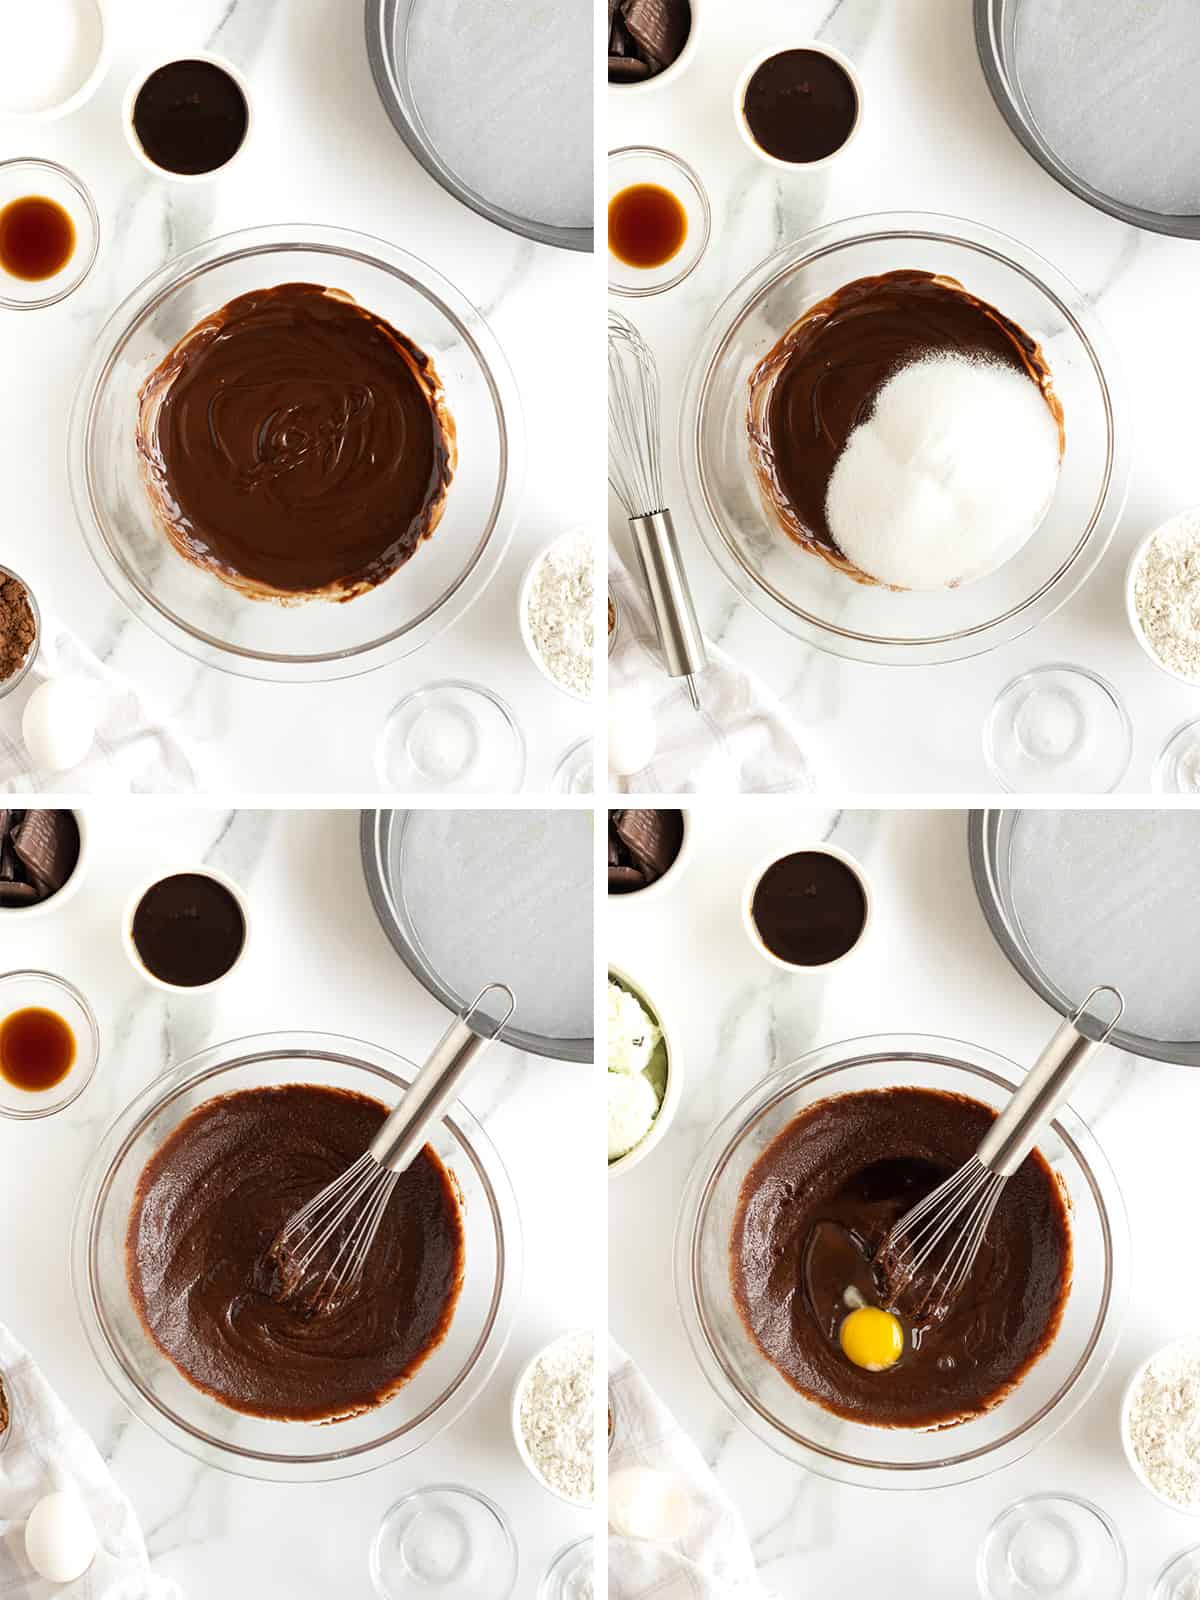 Steps to make the chocolate cake for an ice cream cake.